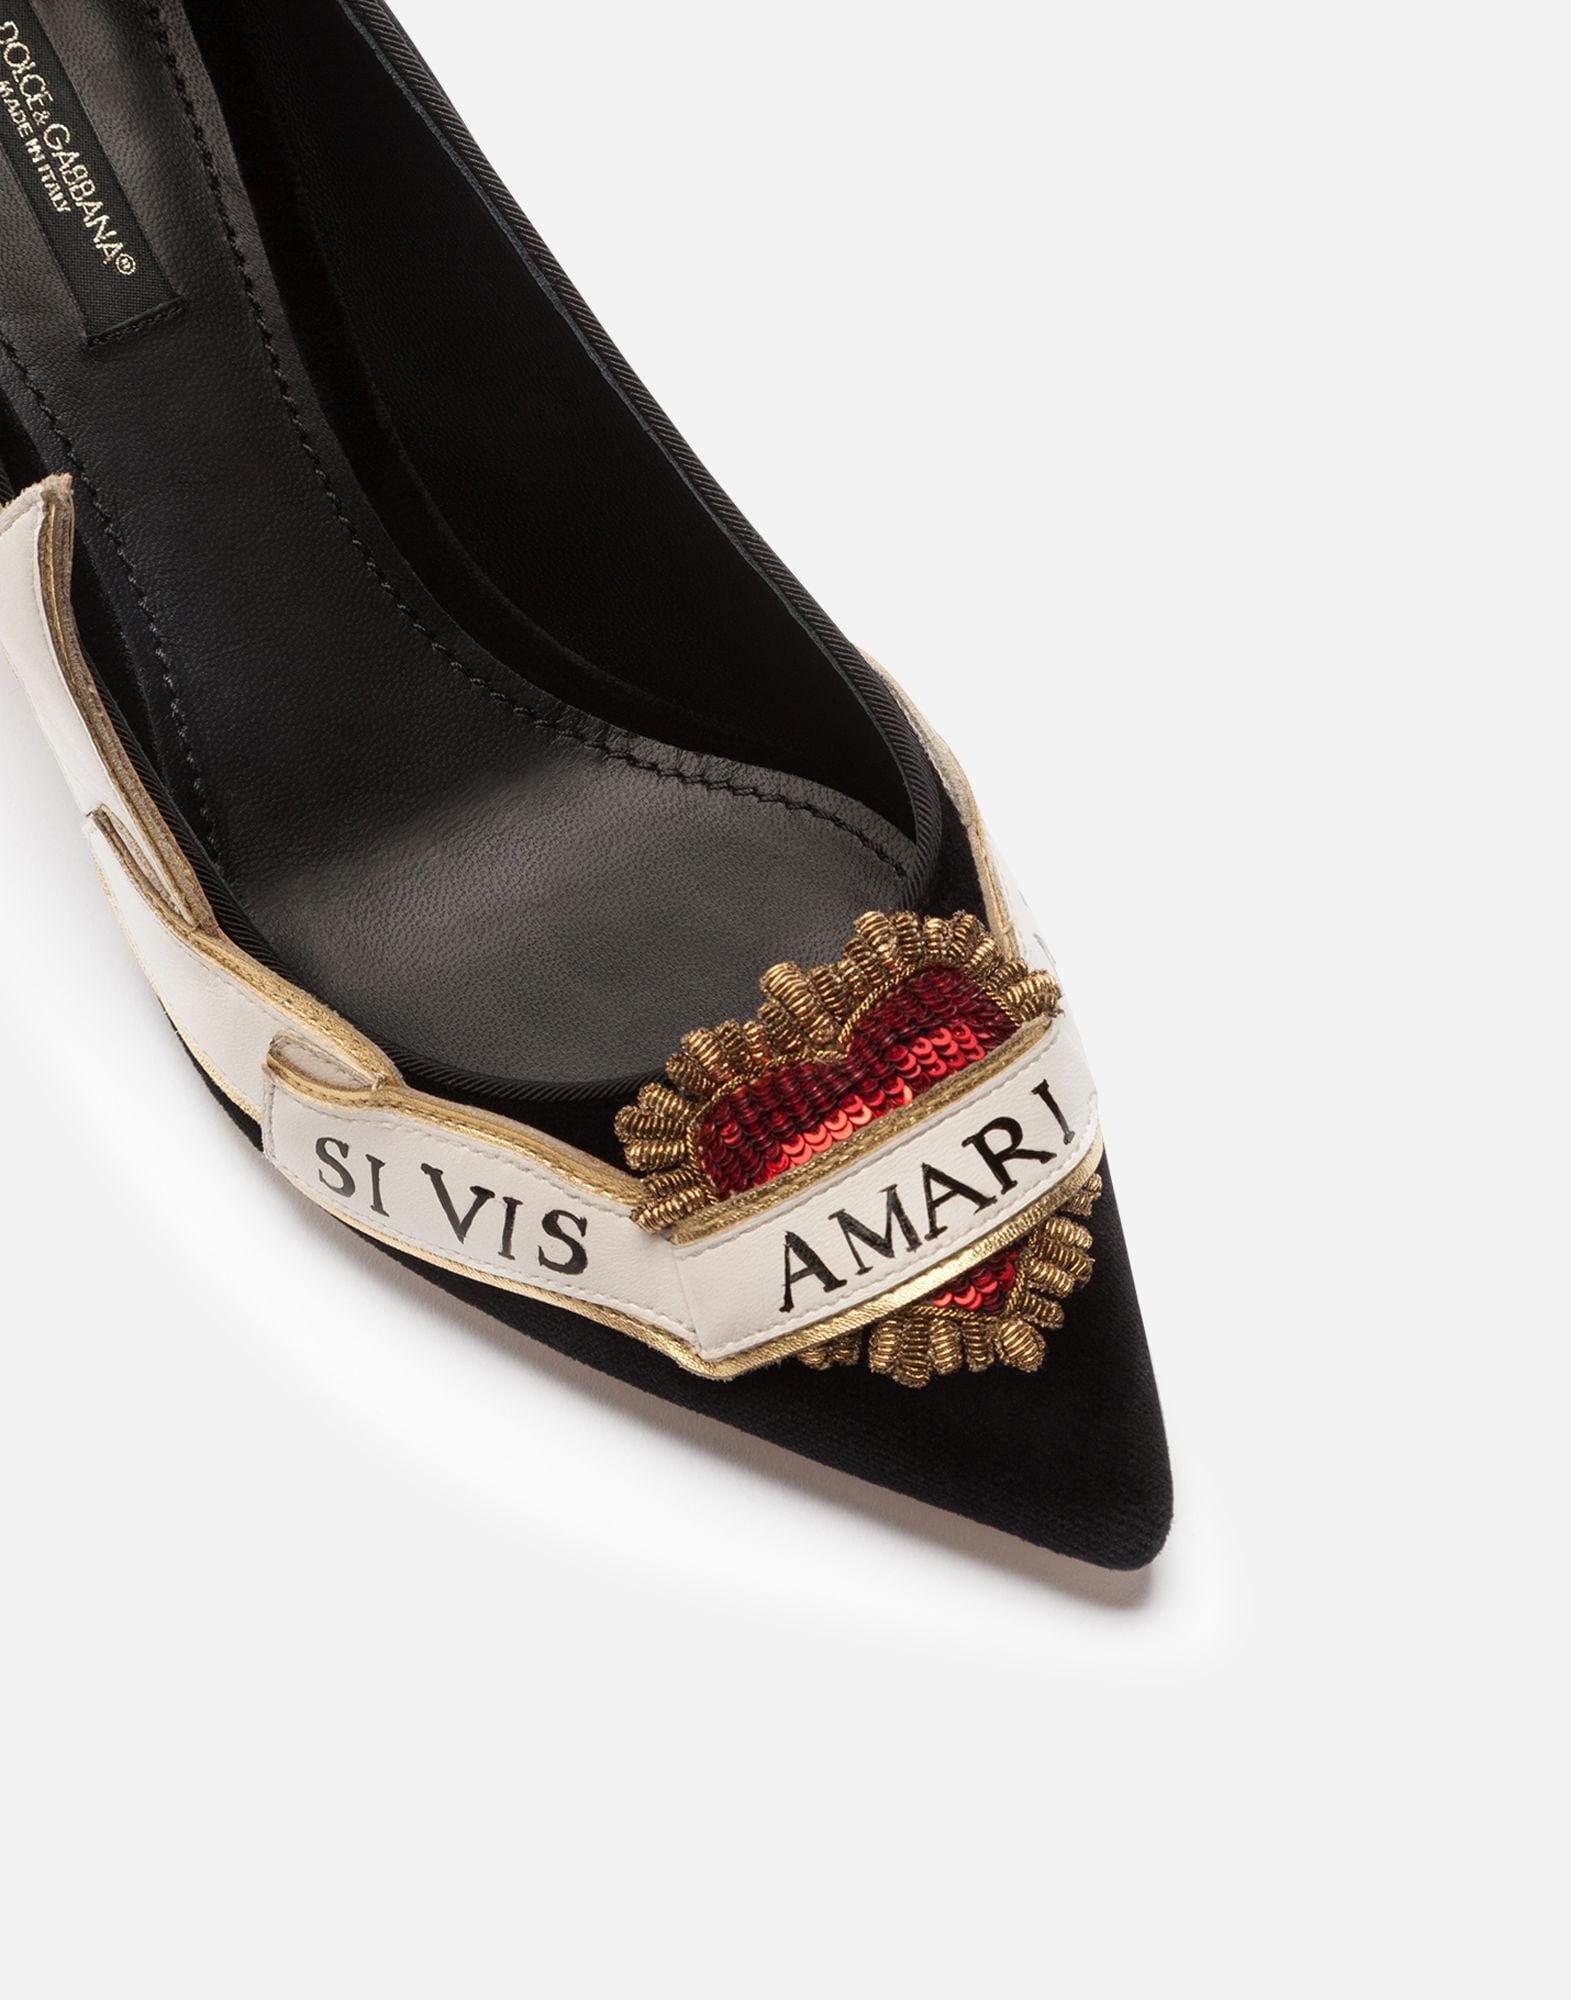 Dolce & Gabbana Velvet Pumps With Embroidery